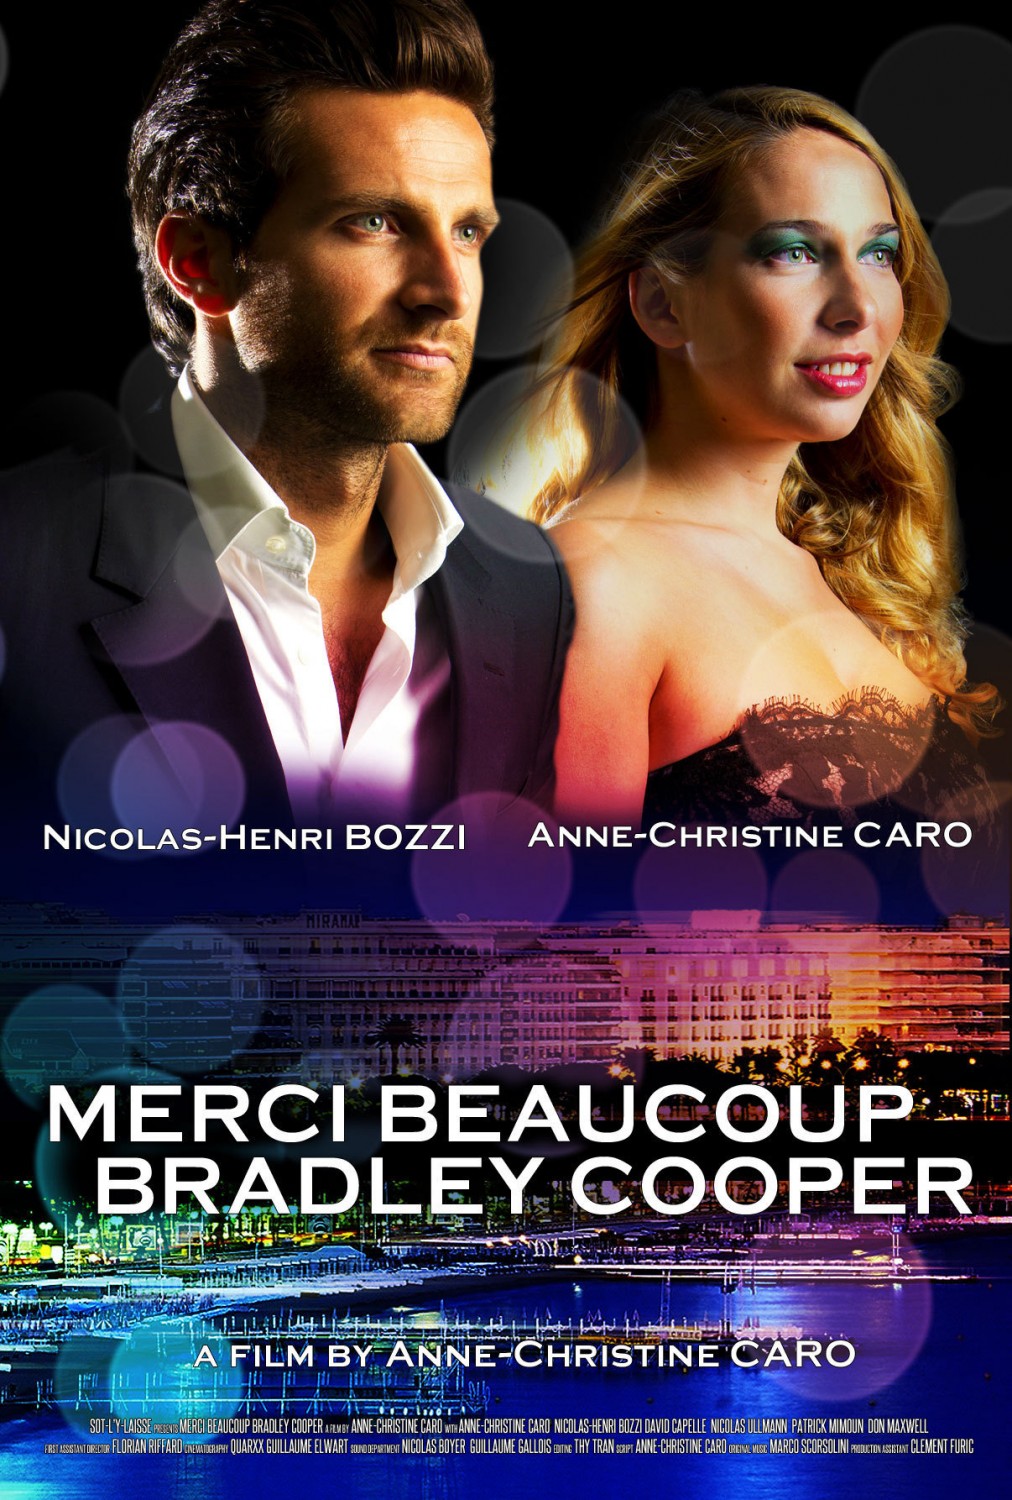 Extra Large Movie Poster Image for Merci beaucoup Bradley Cooper